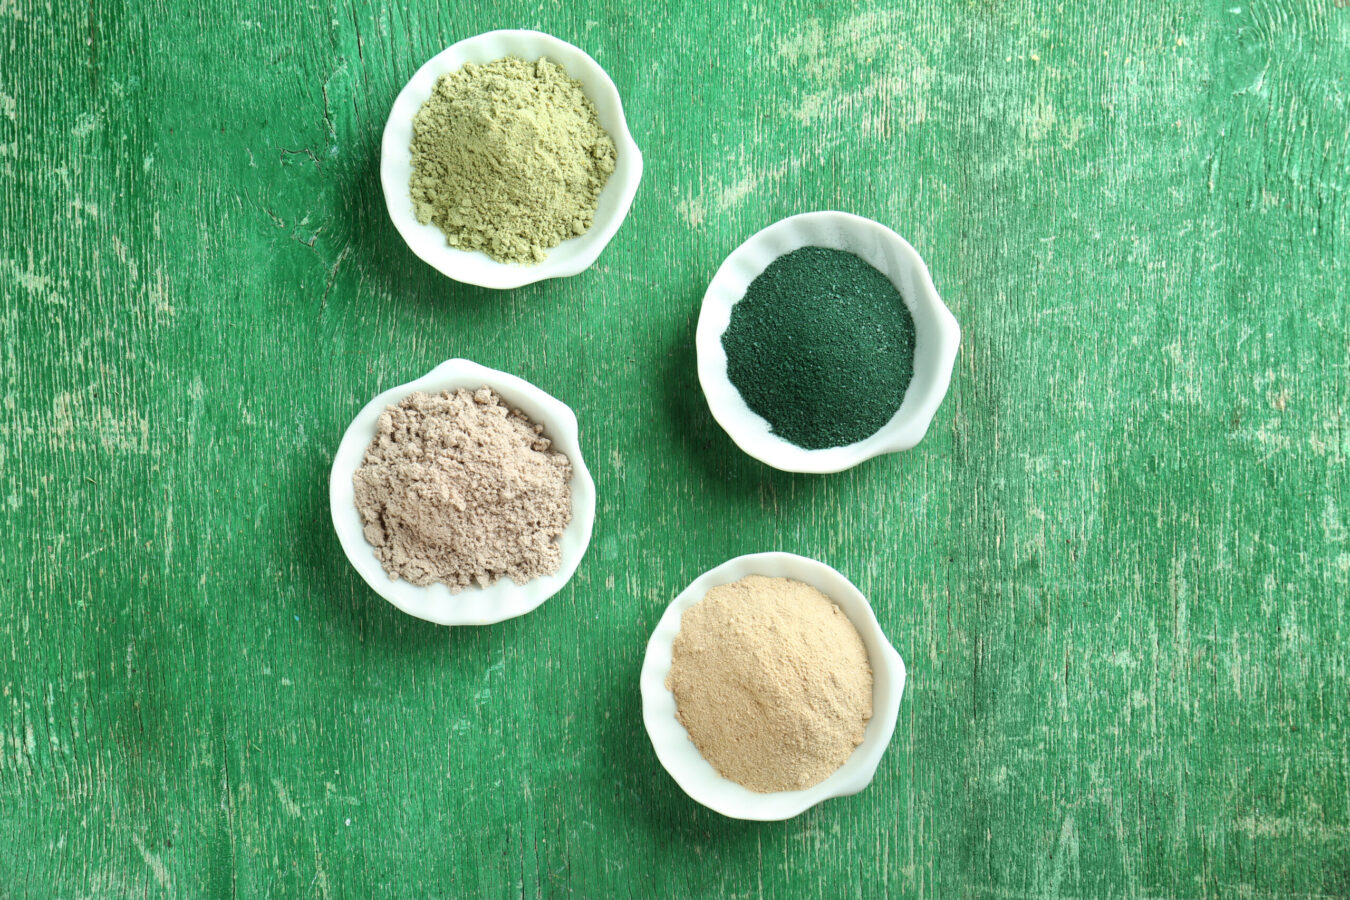 Superfood powders in bowls on wooden table vegan